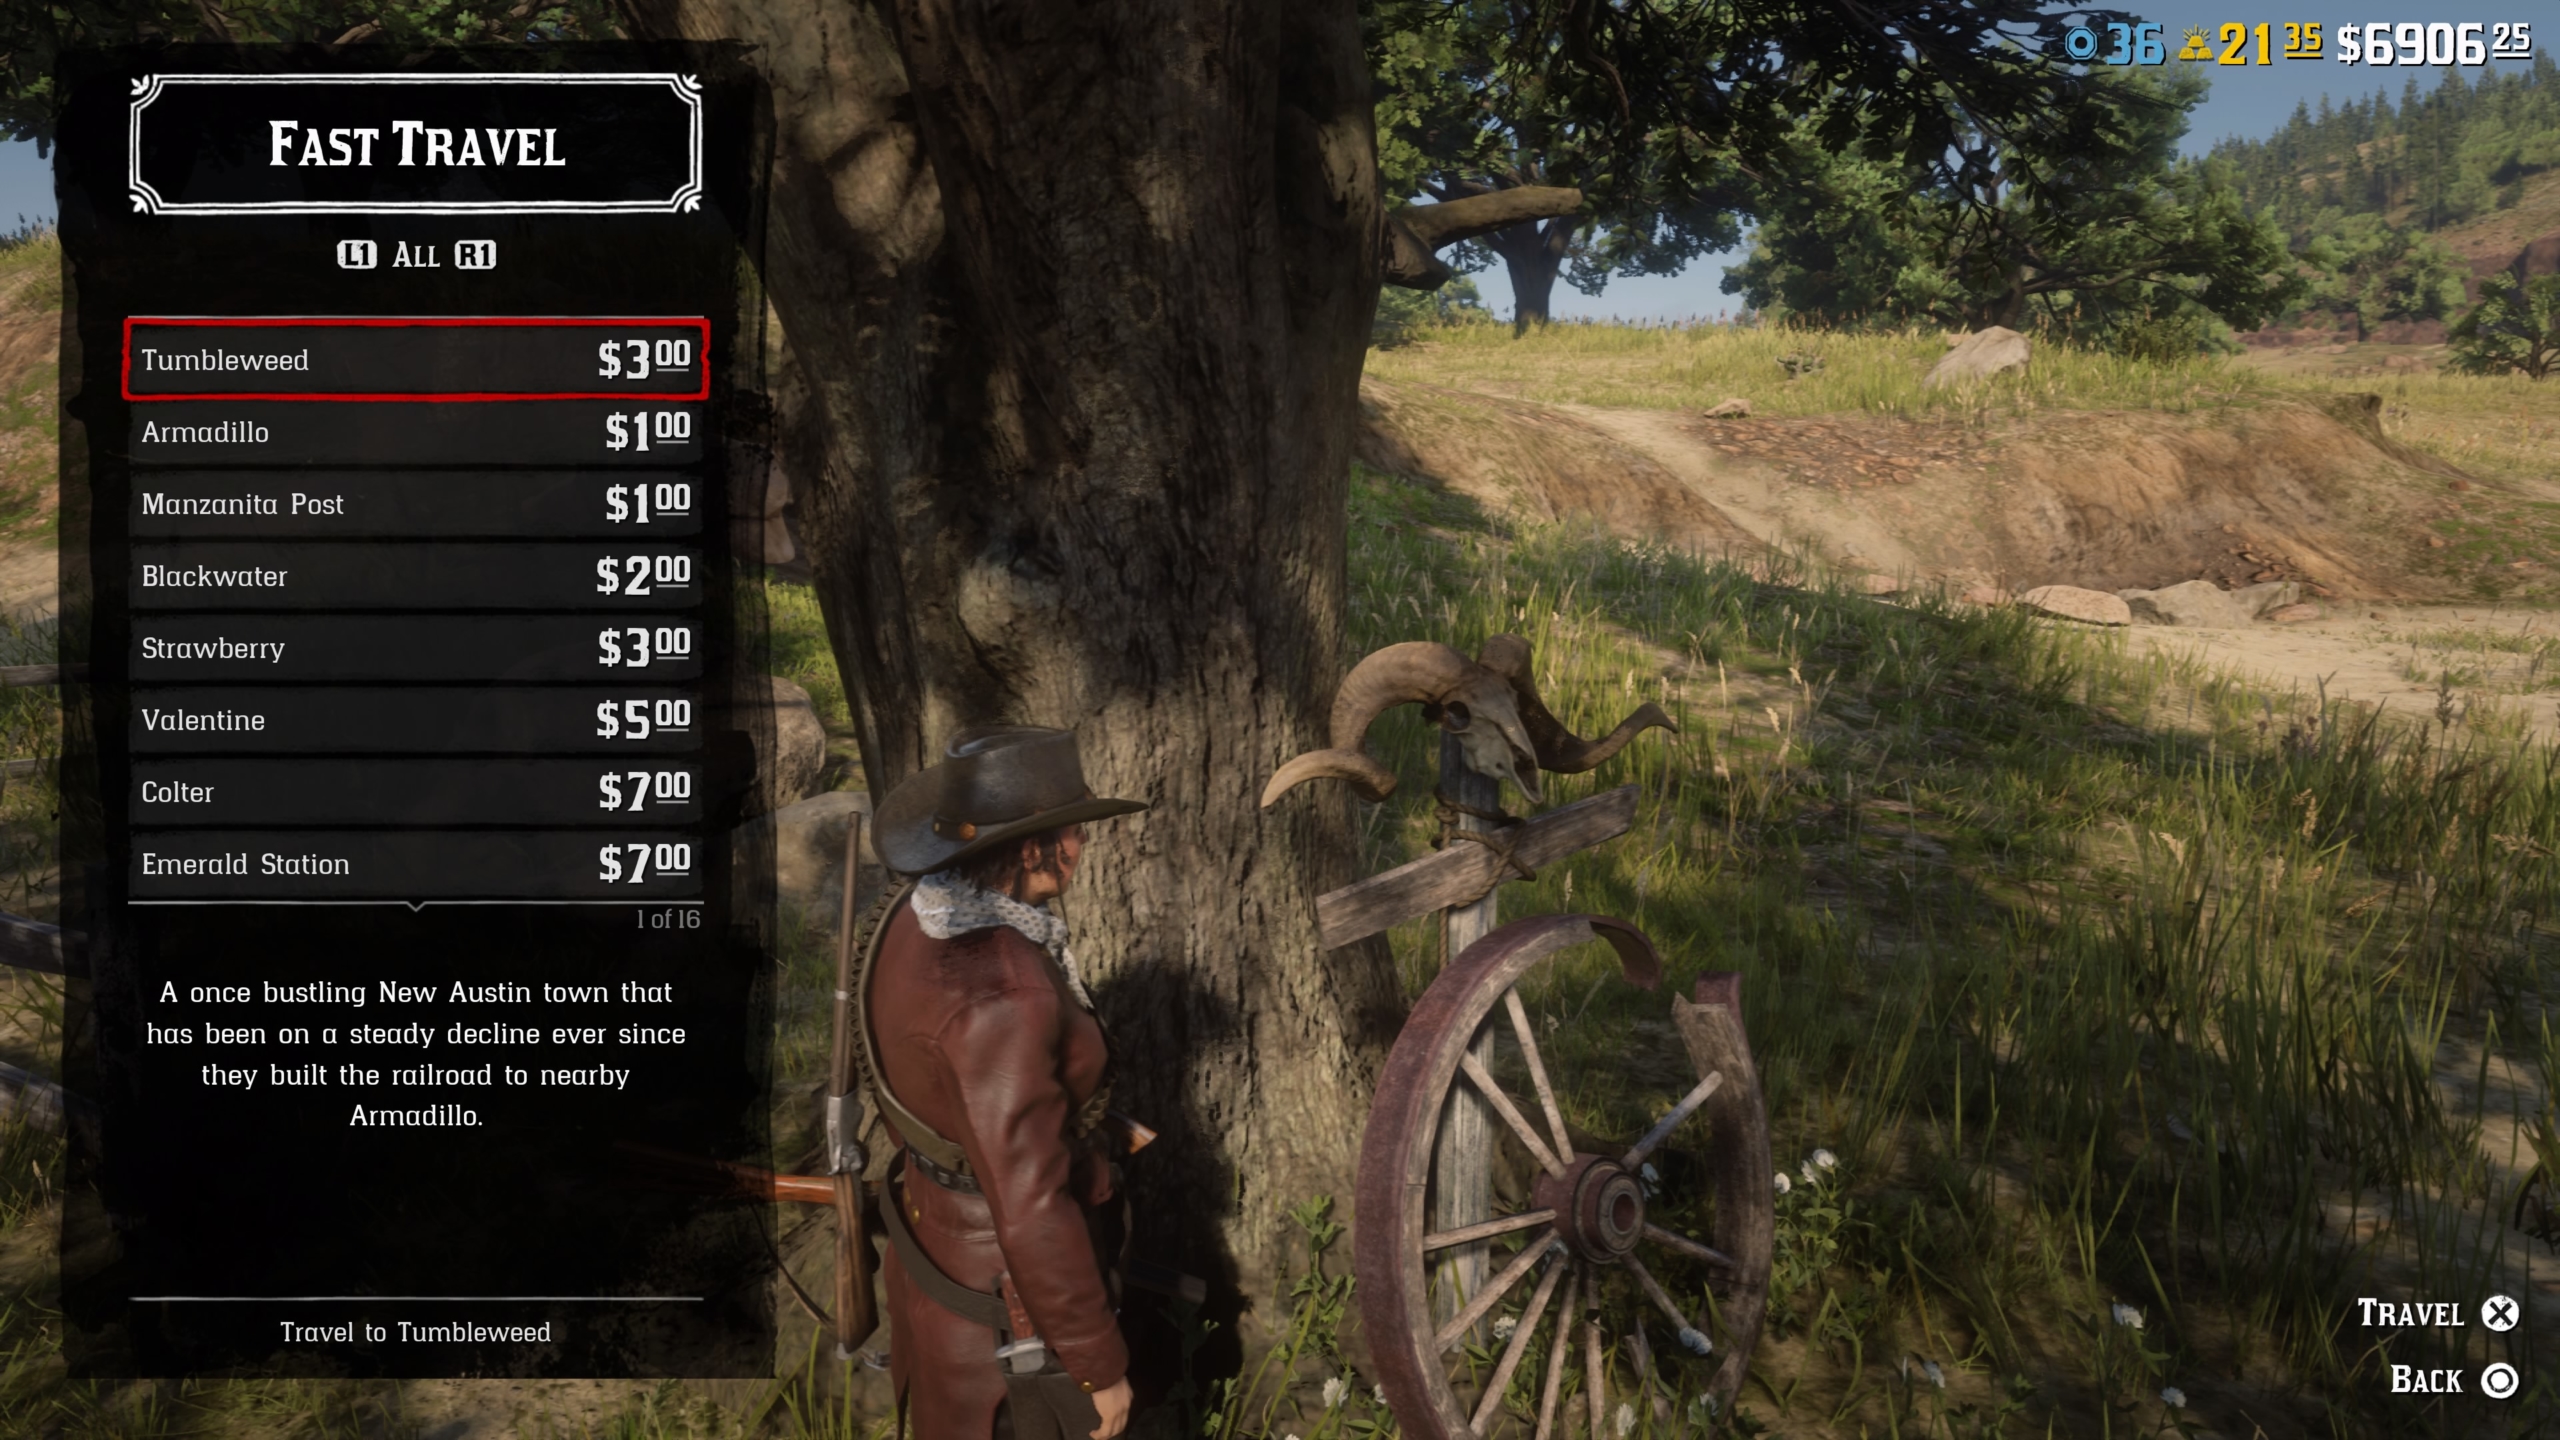 Red Dead Redemption 2's companion app improves the entire game